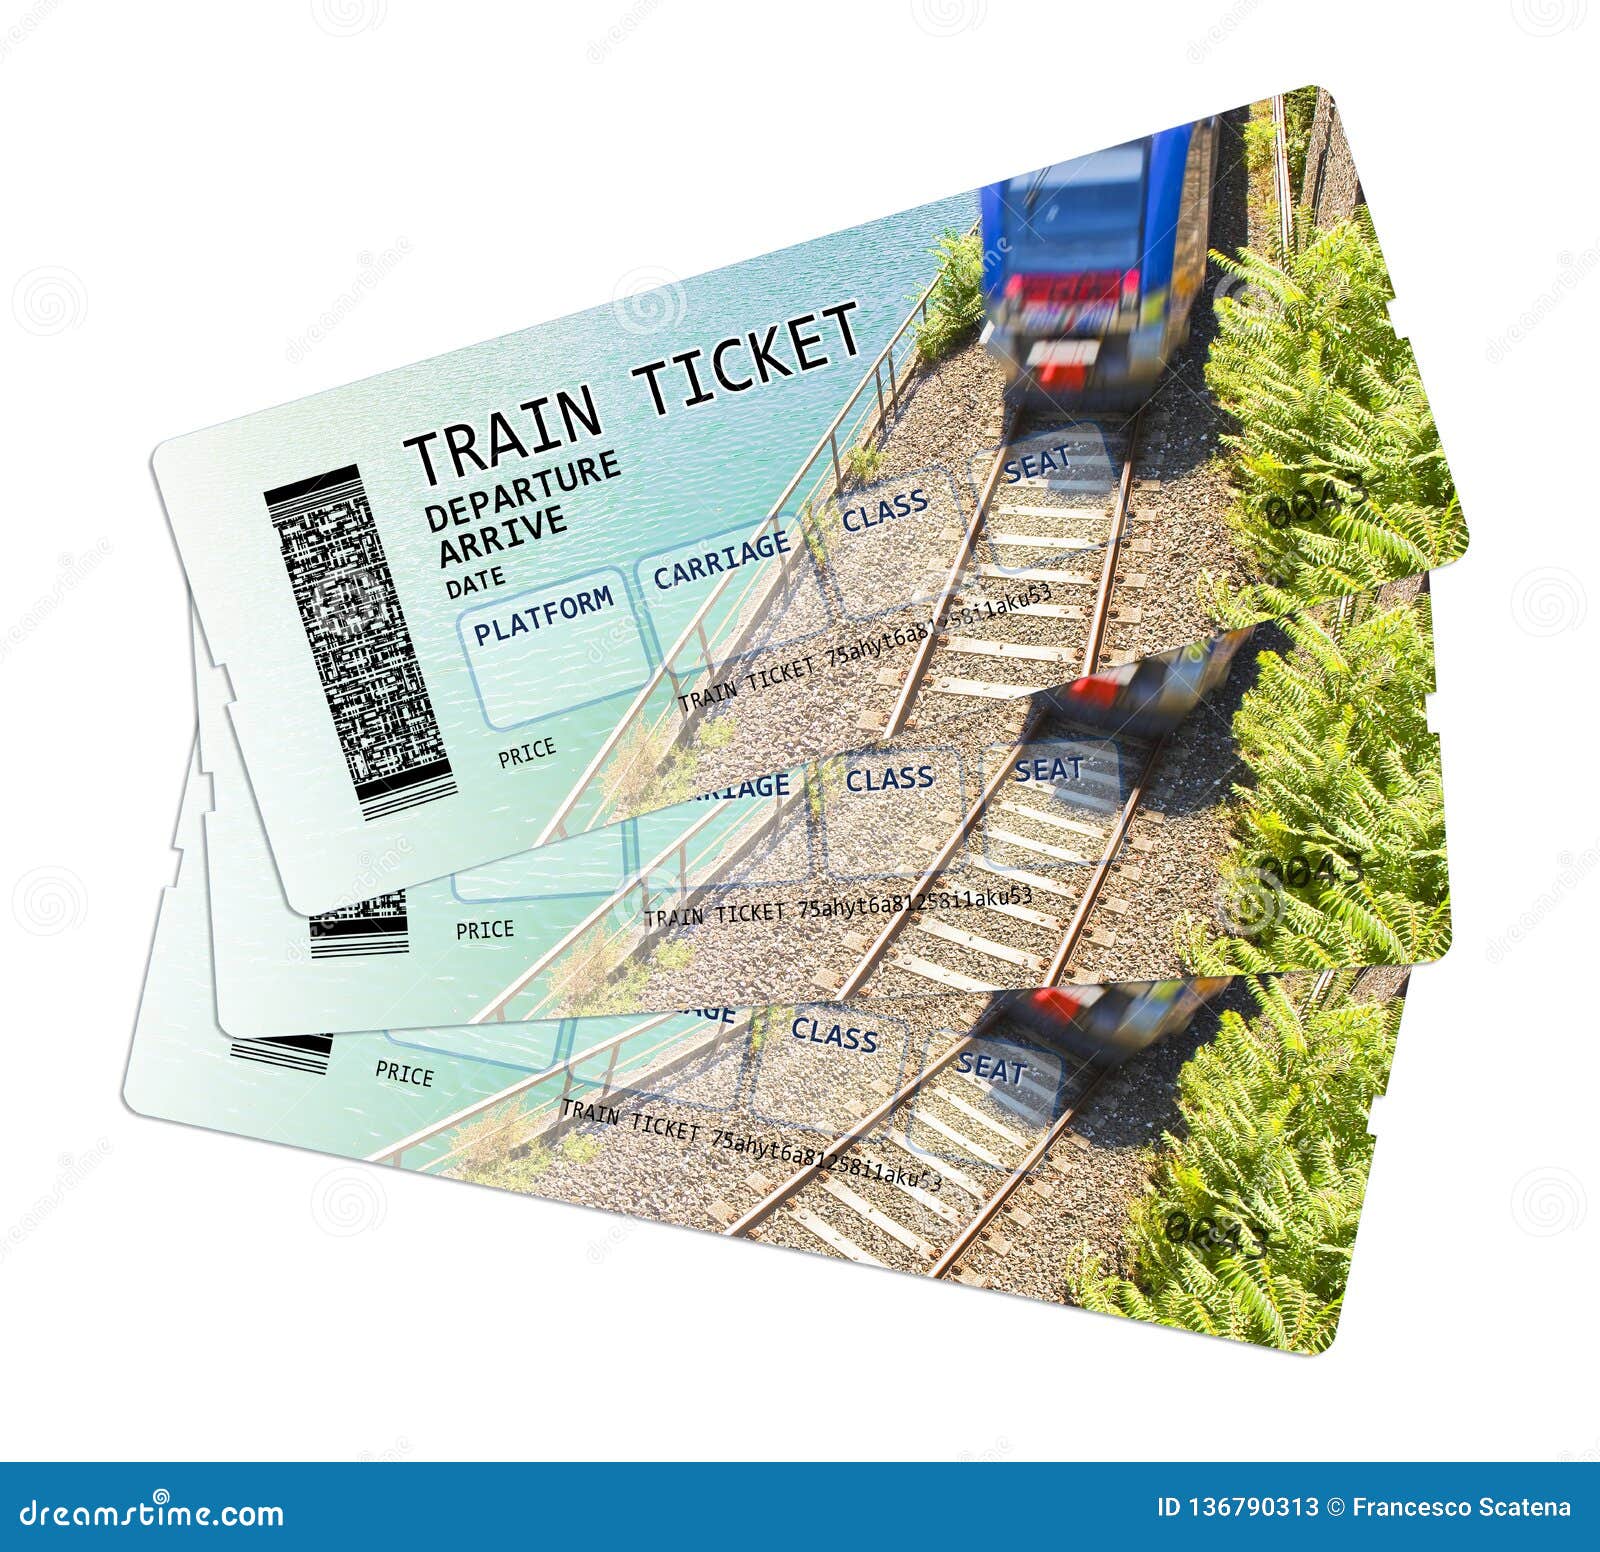 train ticket concept image. the contents of the image are totally invented